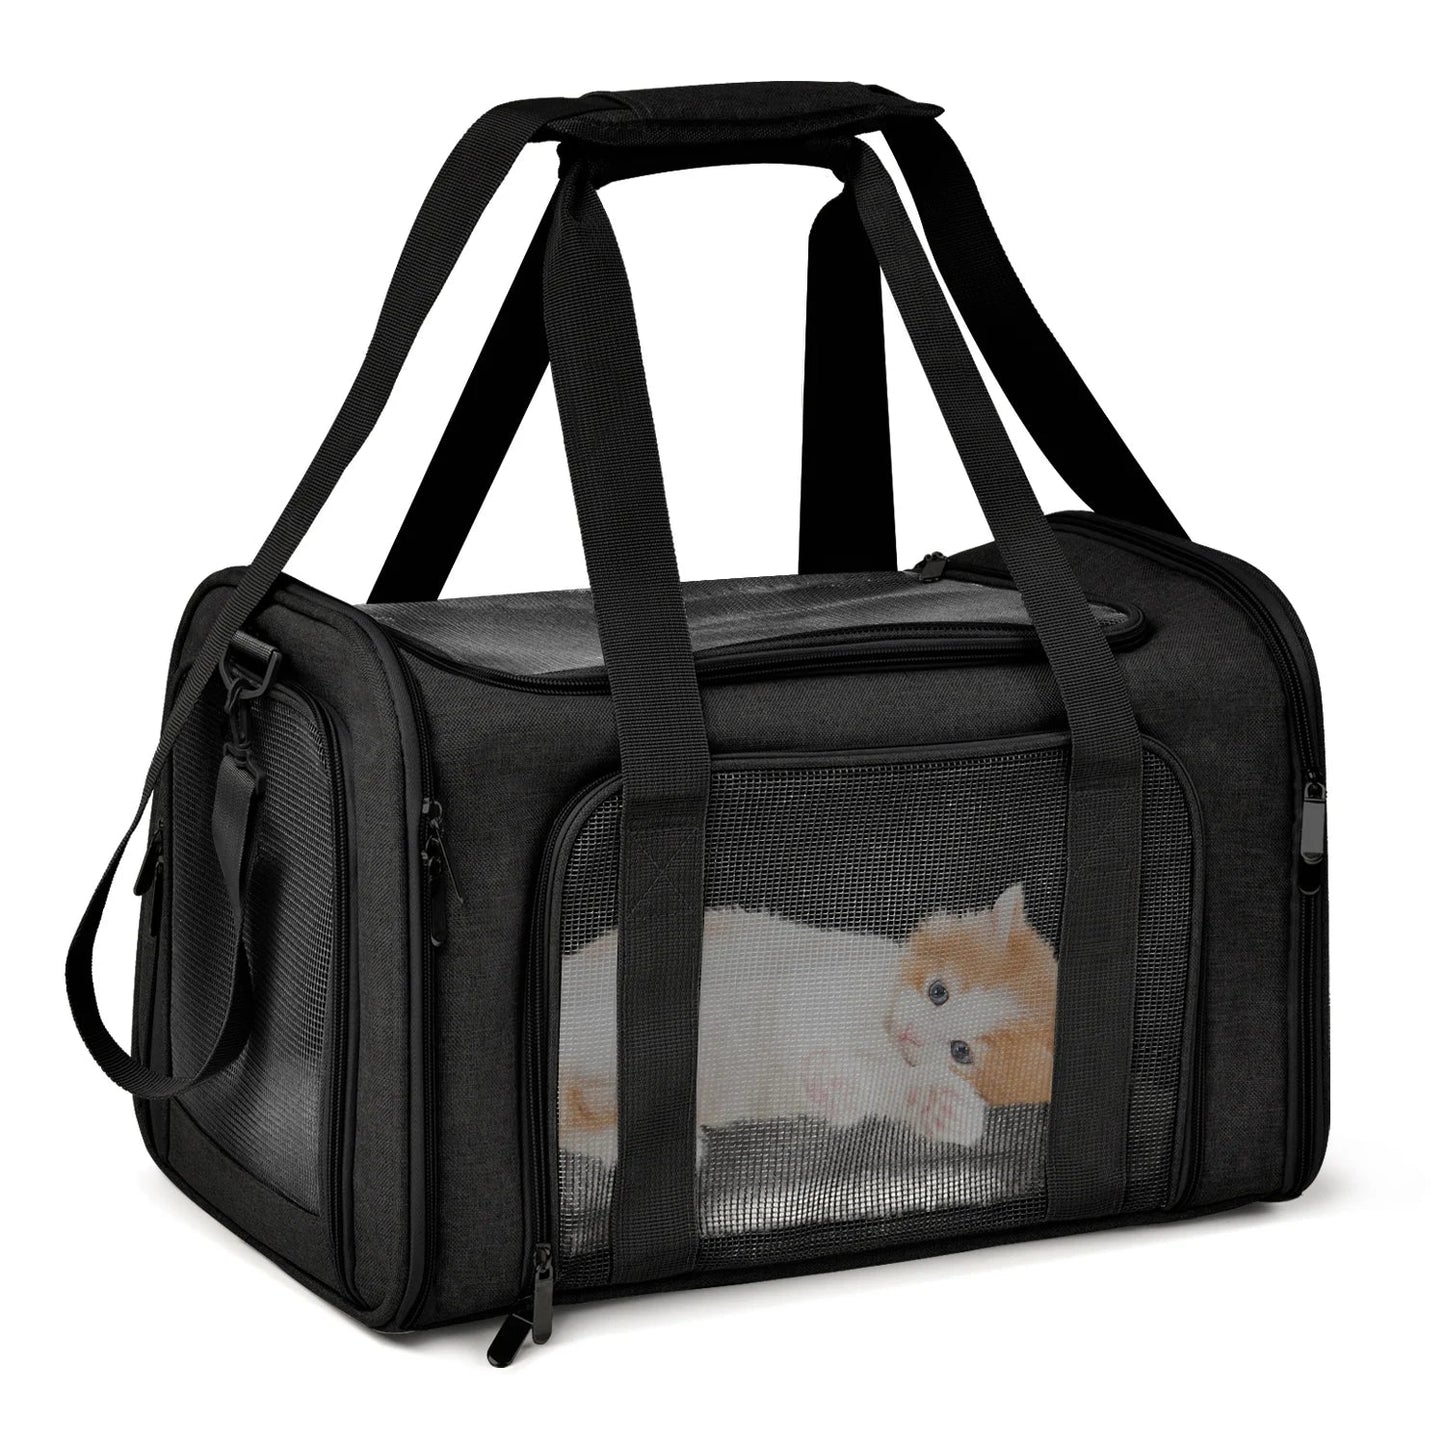 French Bulldog Airline Carrier The Store Bags black M (43x28x28cm) 